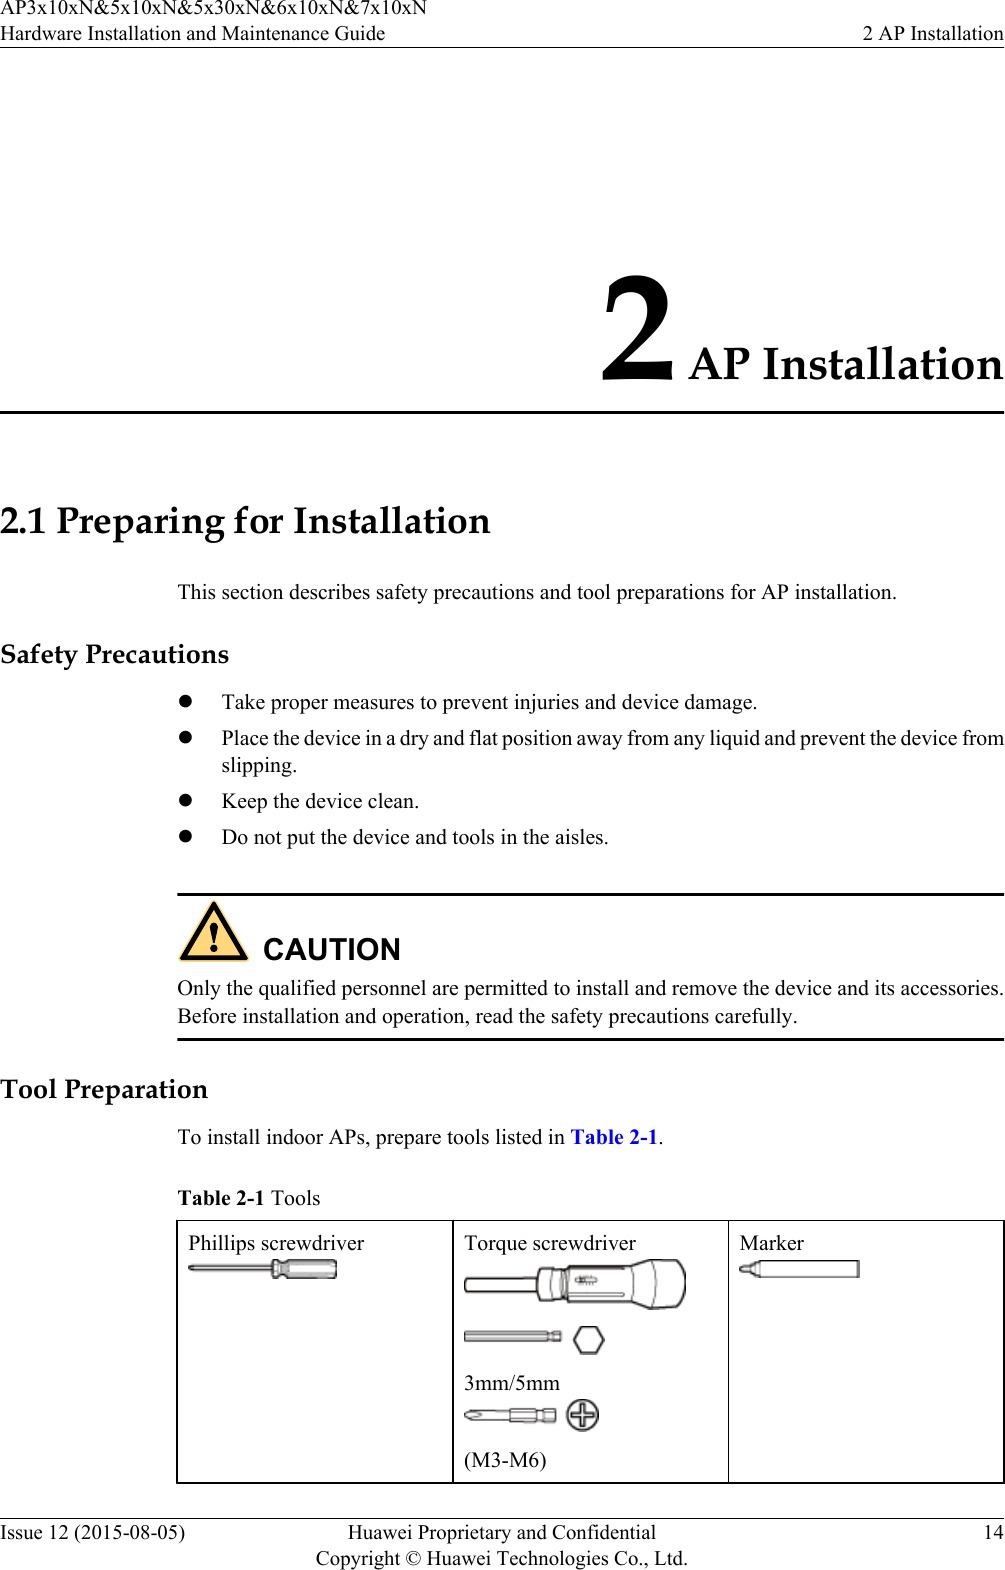 2 AP Installation2.1 Preparing for InstallationThis section describes safety precautions and tool preparations for AP installation.Safety PrecautionslTake proper measures to prevent injuries and device damage.lPlace the device in a dry and flat position away from any liquid and prevent the device fromslipping.lKeep the device clean.lDo not put the device and tools in the aisles.CAUTIONOnly the qualified personnel are permitted to install and remove the device and its accessories.Before installation and operation, read the safety precautions carefully.Tool PreparationTo install indoor APs, prepare tools listed in Table 2-1.Table 2-1 ToolsPhillips screwdriver Torque screwdriver3mm/5mm(M3-M6)MarkerAP3x10xN&amp;5x10xN&amp;5x30xN&amp;6x10xN&amp;7x10xNHardware Installation and Maintenance Guide 2 AP InstallationIssue 12 (2015-08-05) Huawei Proprietary and ConfidentialCopyright © Huawei Technologies Co., Ltd.14